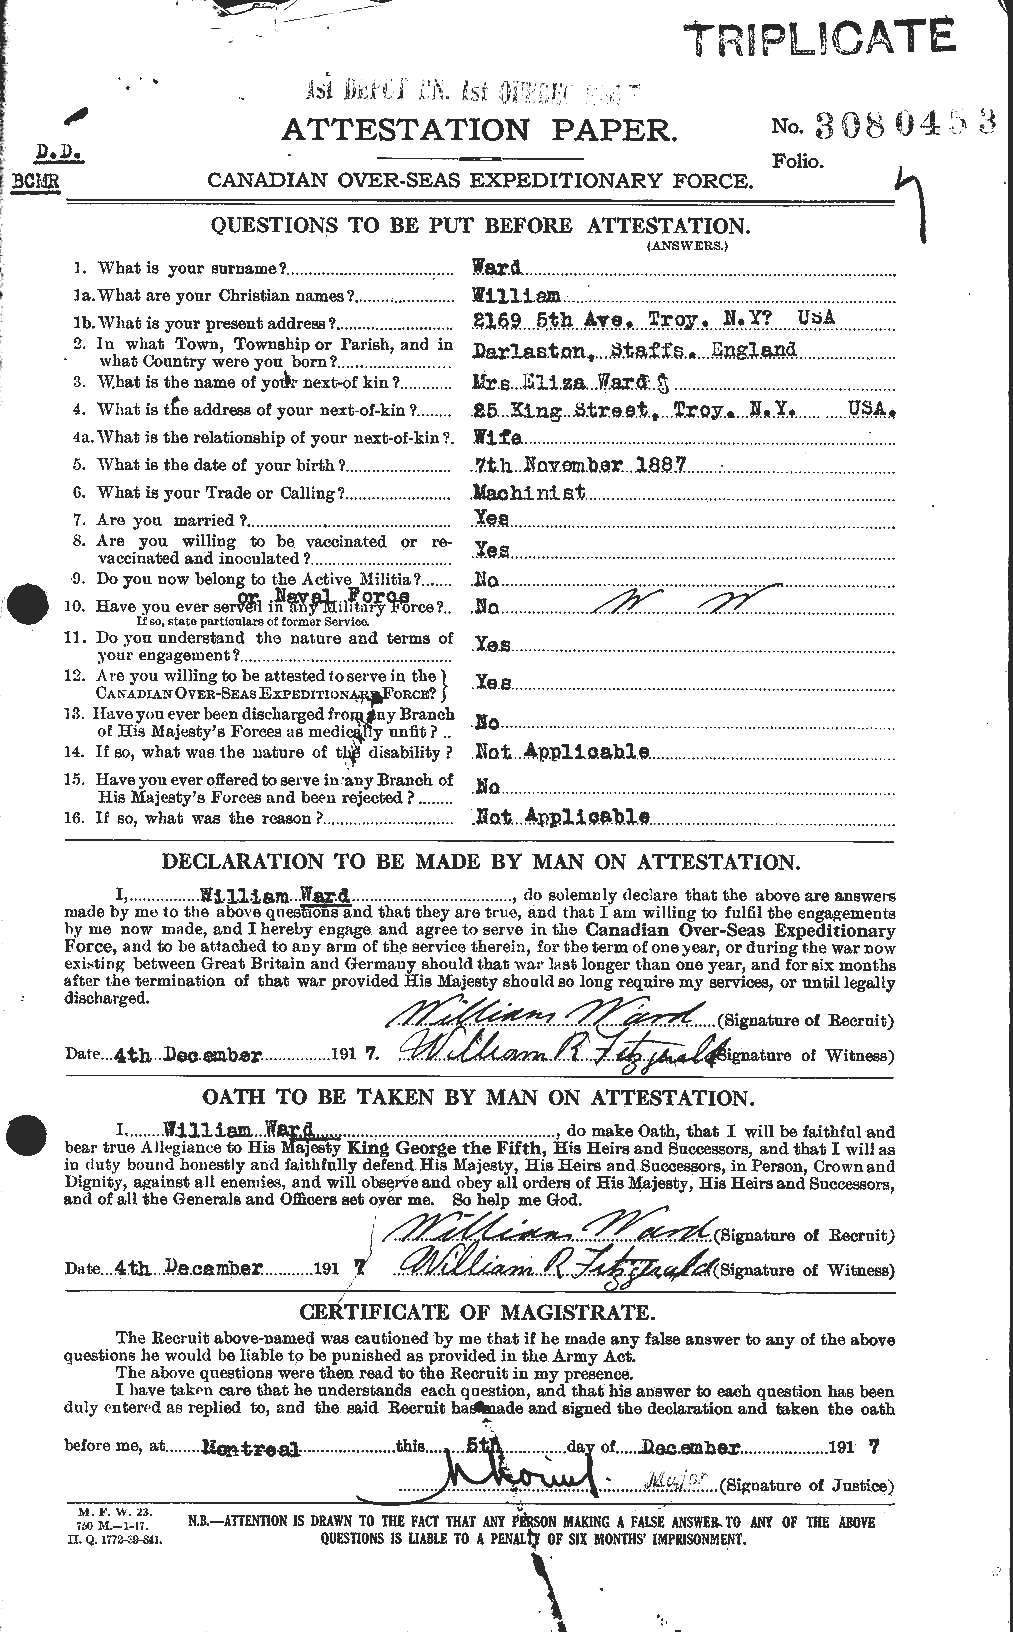 Personnel Records of the First World War - CEF 659797a